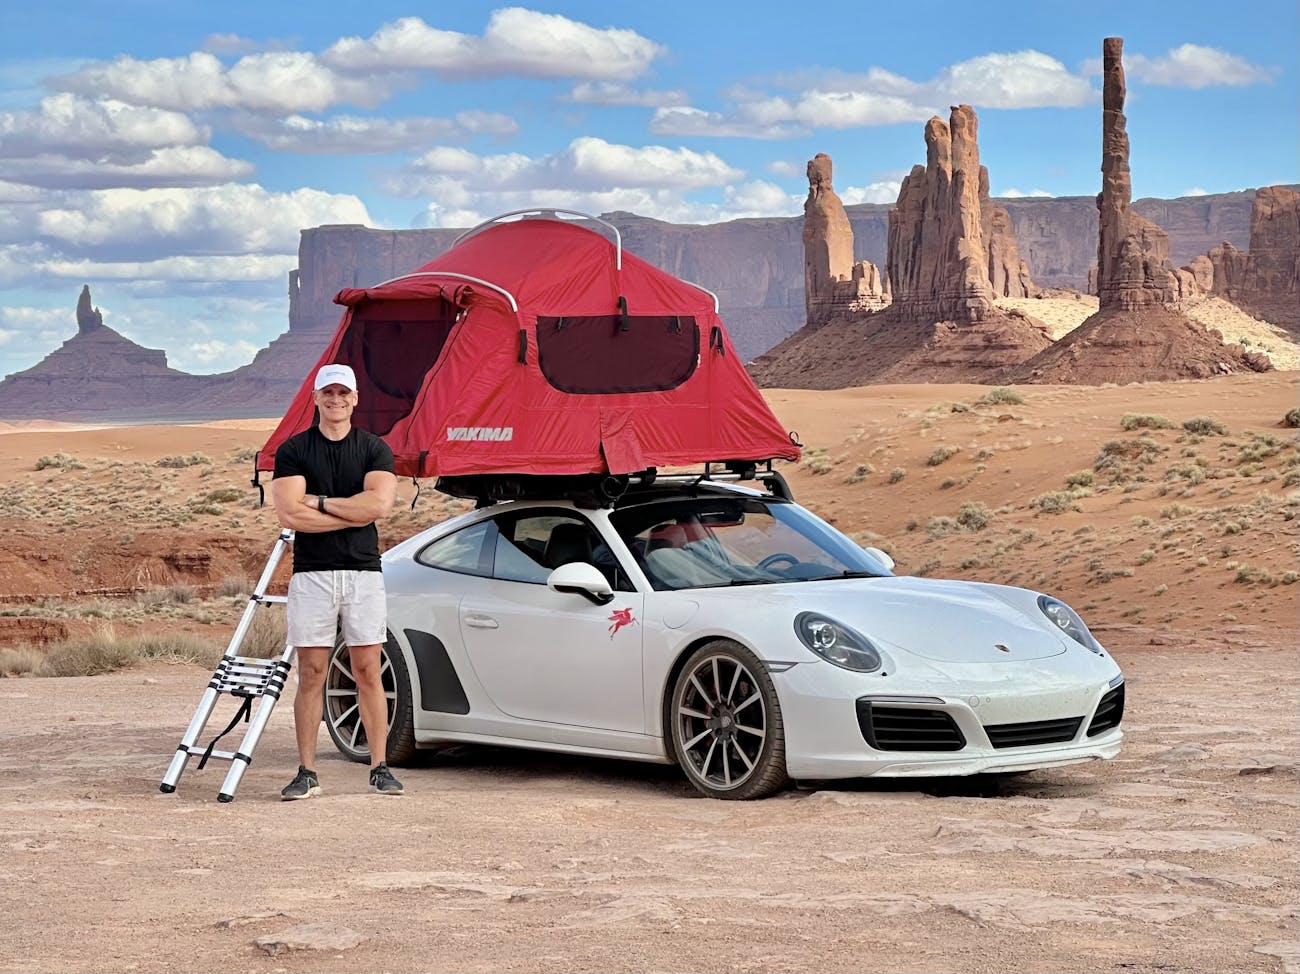 Man and Porsche 911 Carrera 4 in Monument Valley, USA